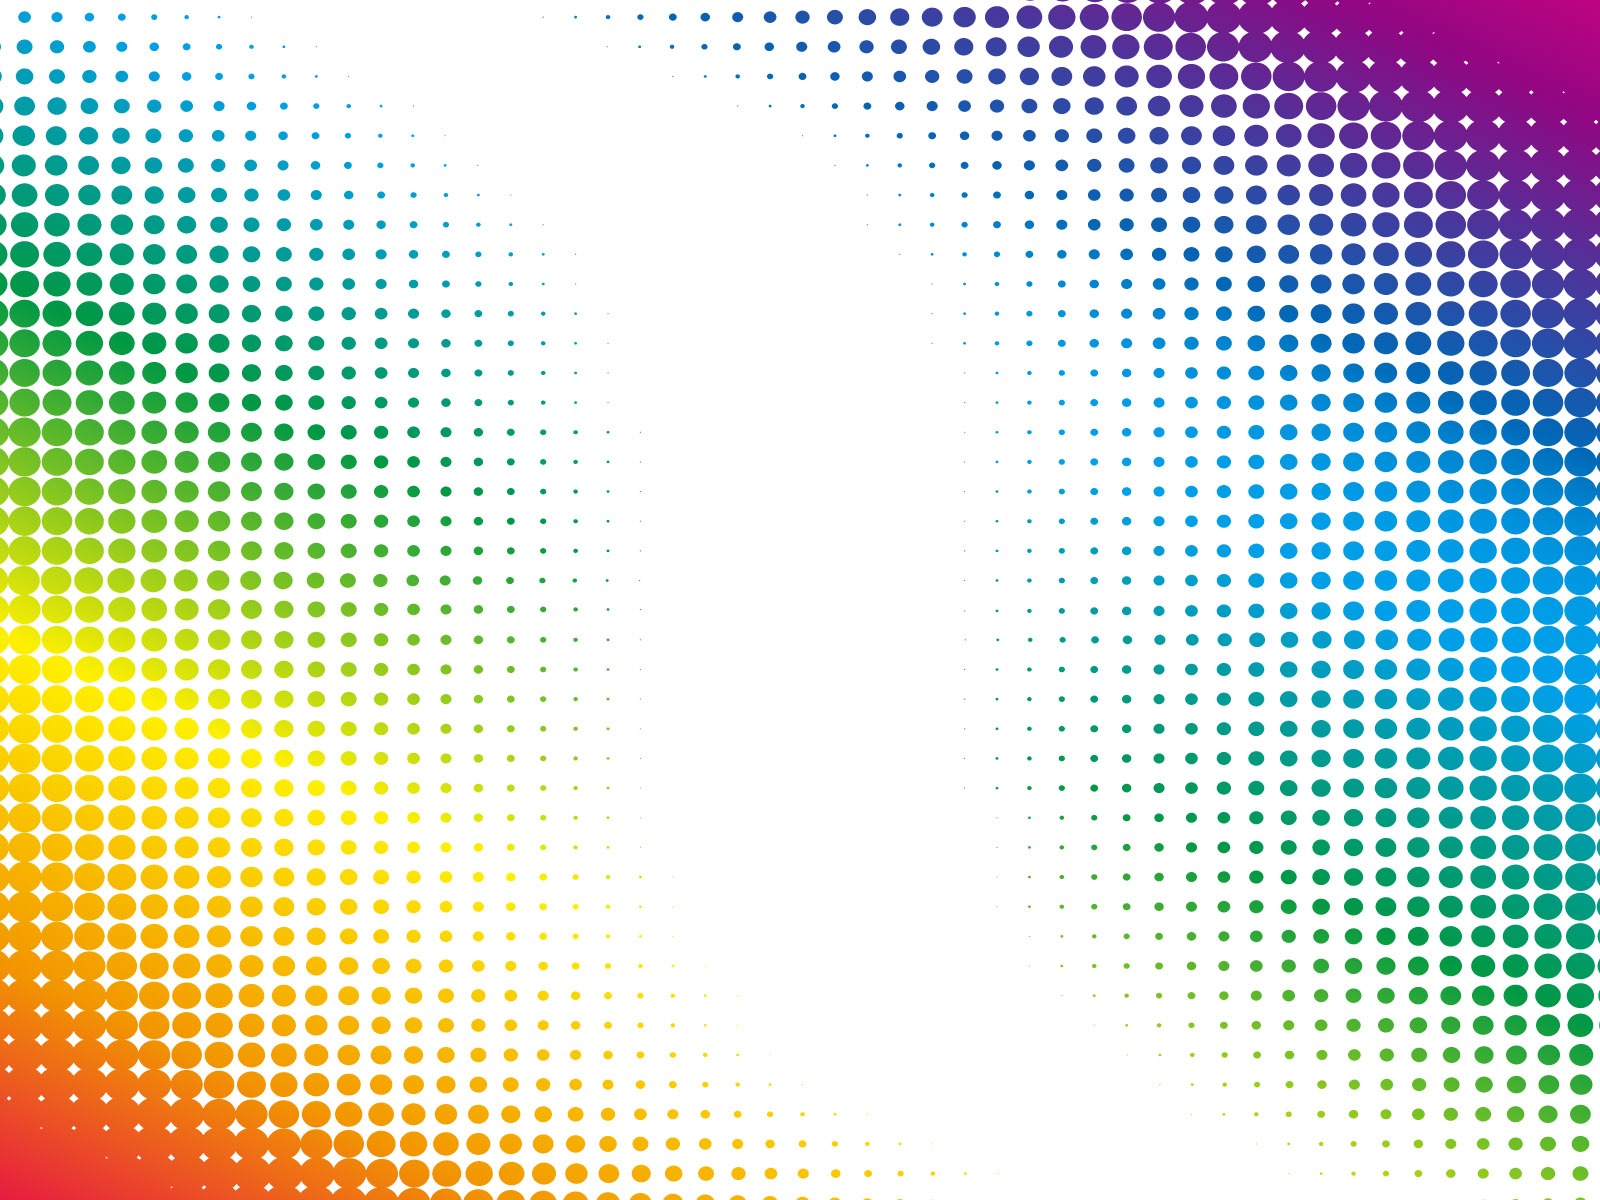 Colorful vector background wallpaper (1) #6 - 1600x1200